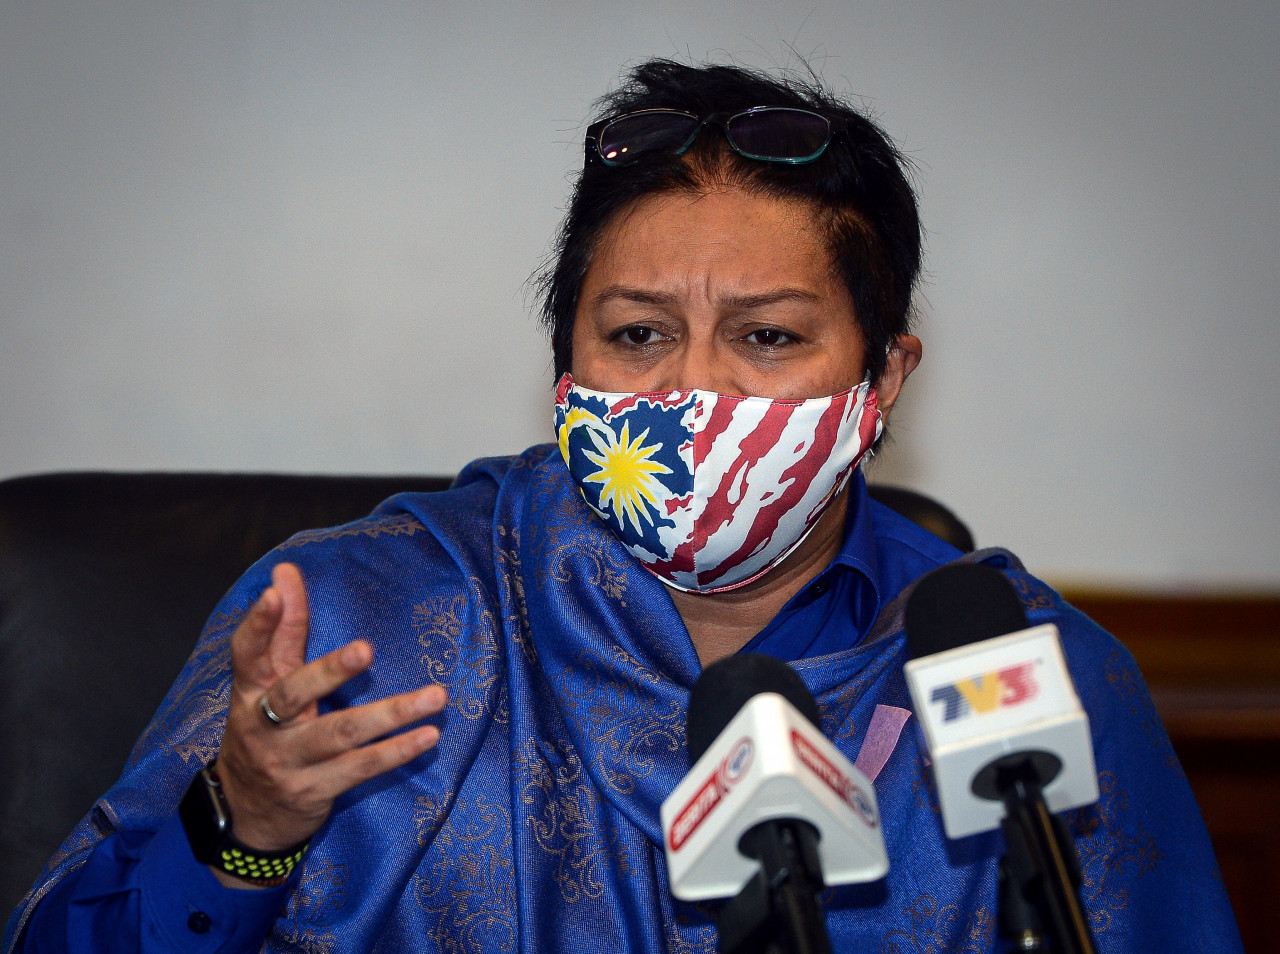 Umno’s Pengerang MP Datuk Seri Azalina Othman Said warns that amending Article 10 alone, without strictly defined anti-party hopping laws, would be ‘too wide and dangerous’. – Bernama pic, April 11, 2022